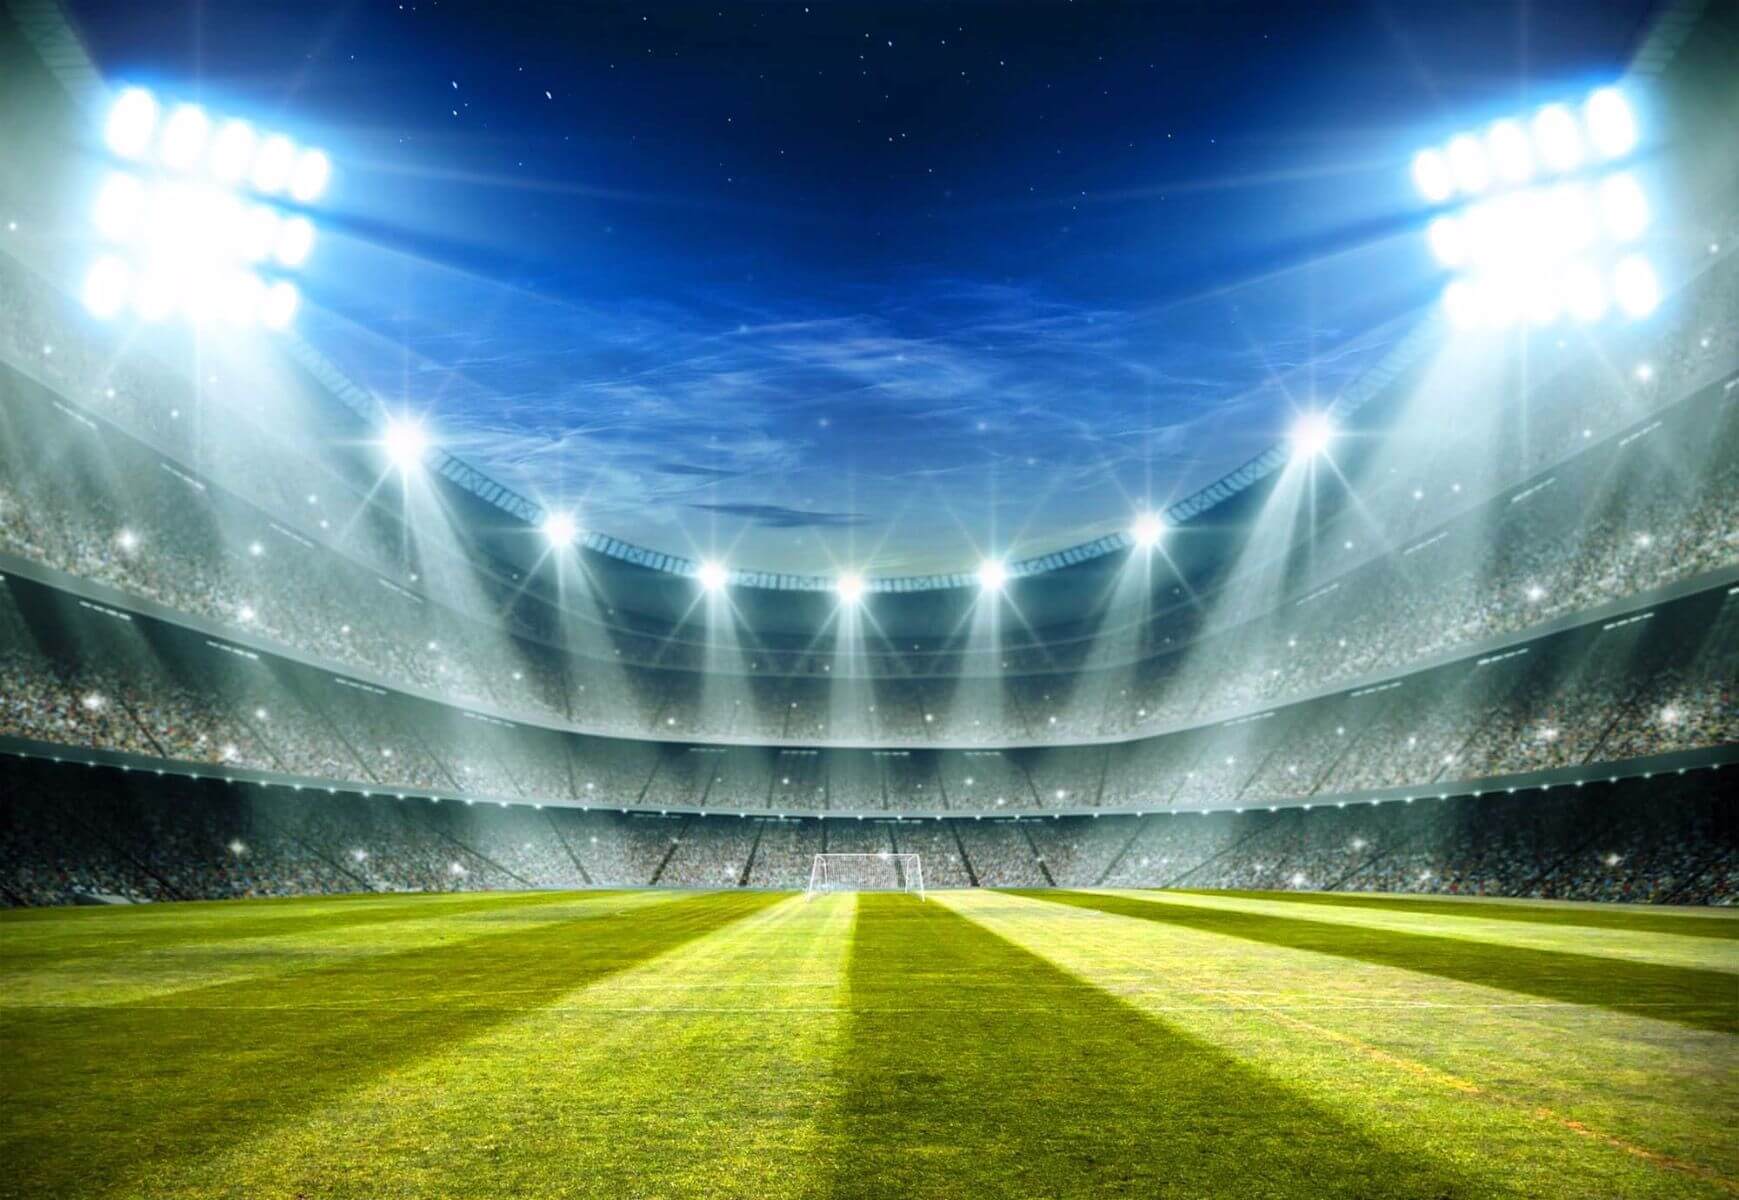 Stadium Wallpapers Top Free Stadium Backgrounds Wallpaperaccess Images